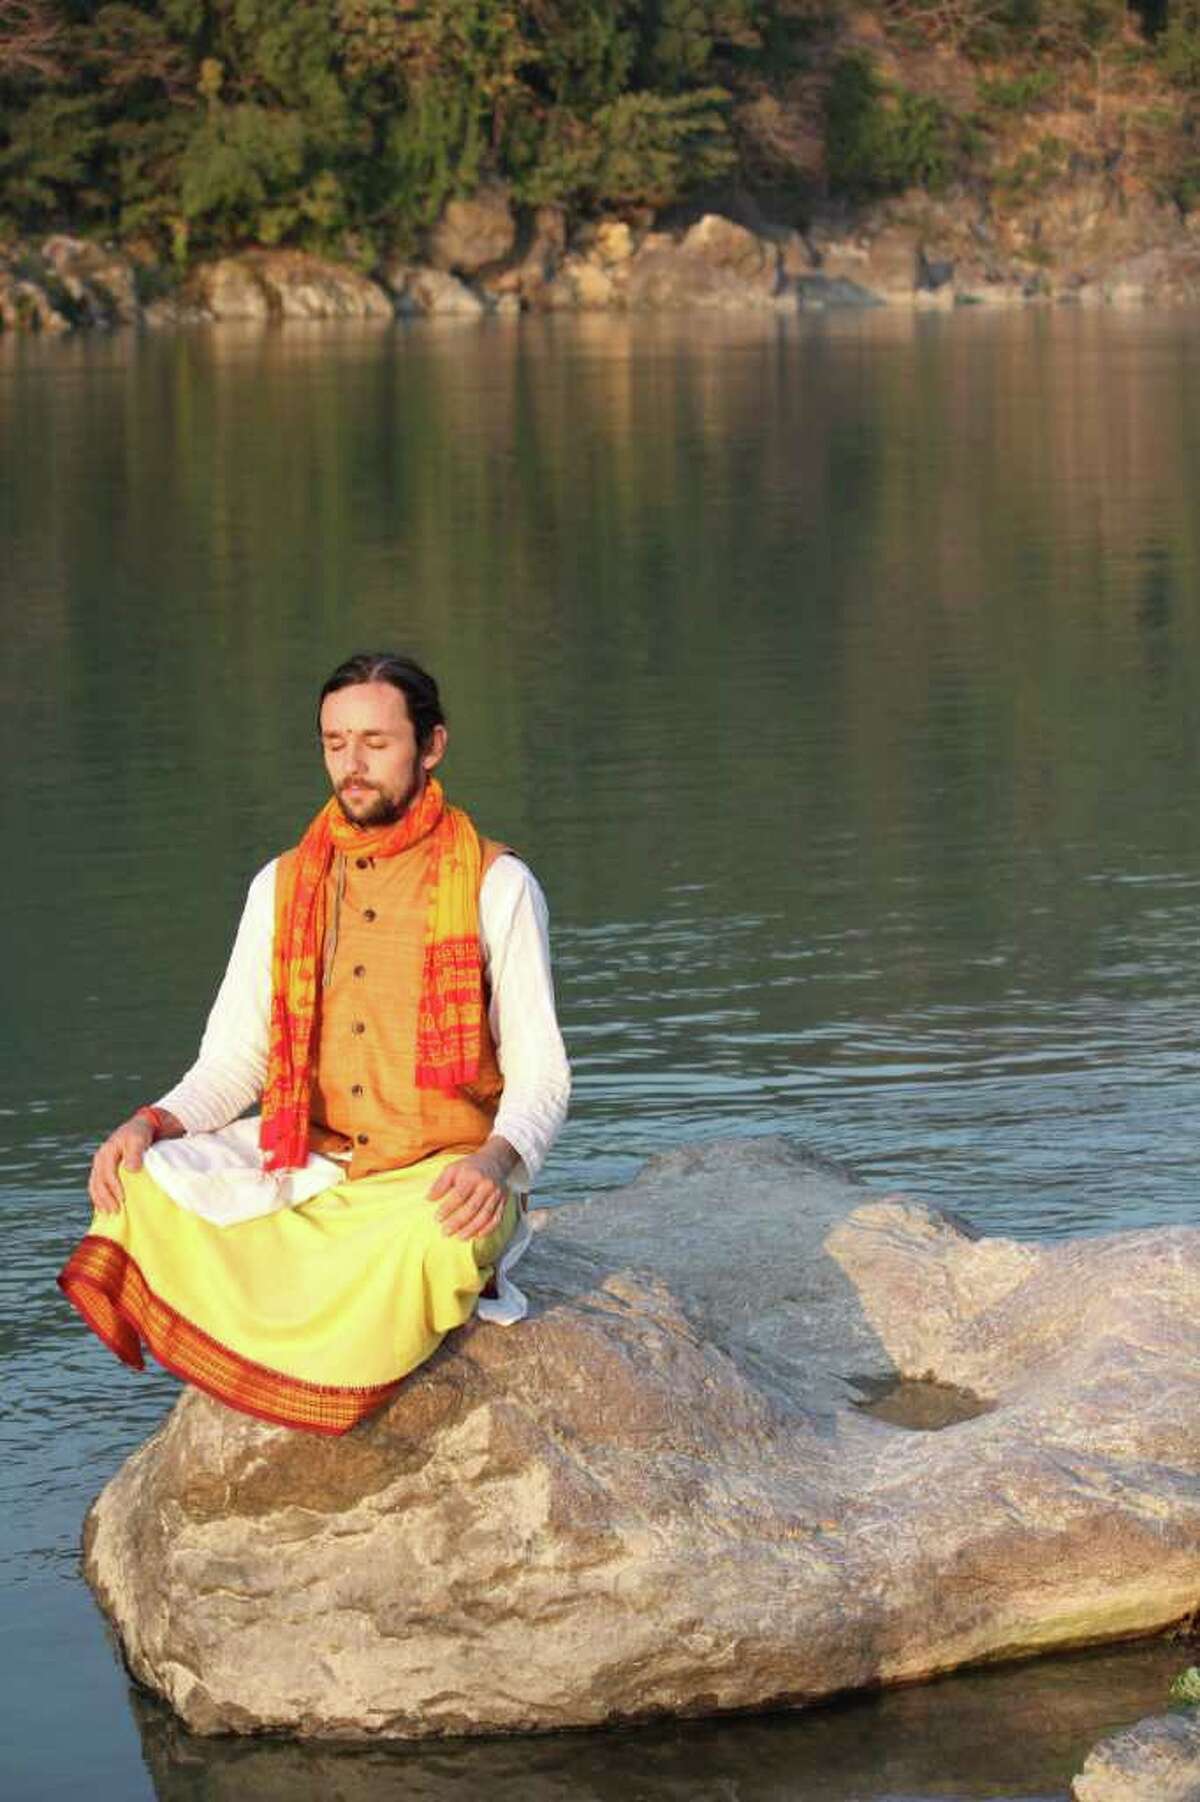 Tyagaraja recently returned from a three-month tour in India and will perform at this weekend's Texas Yoga Conference and Music Festival.